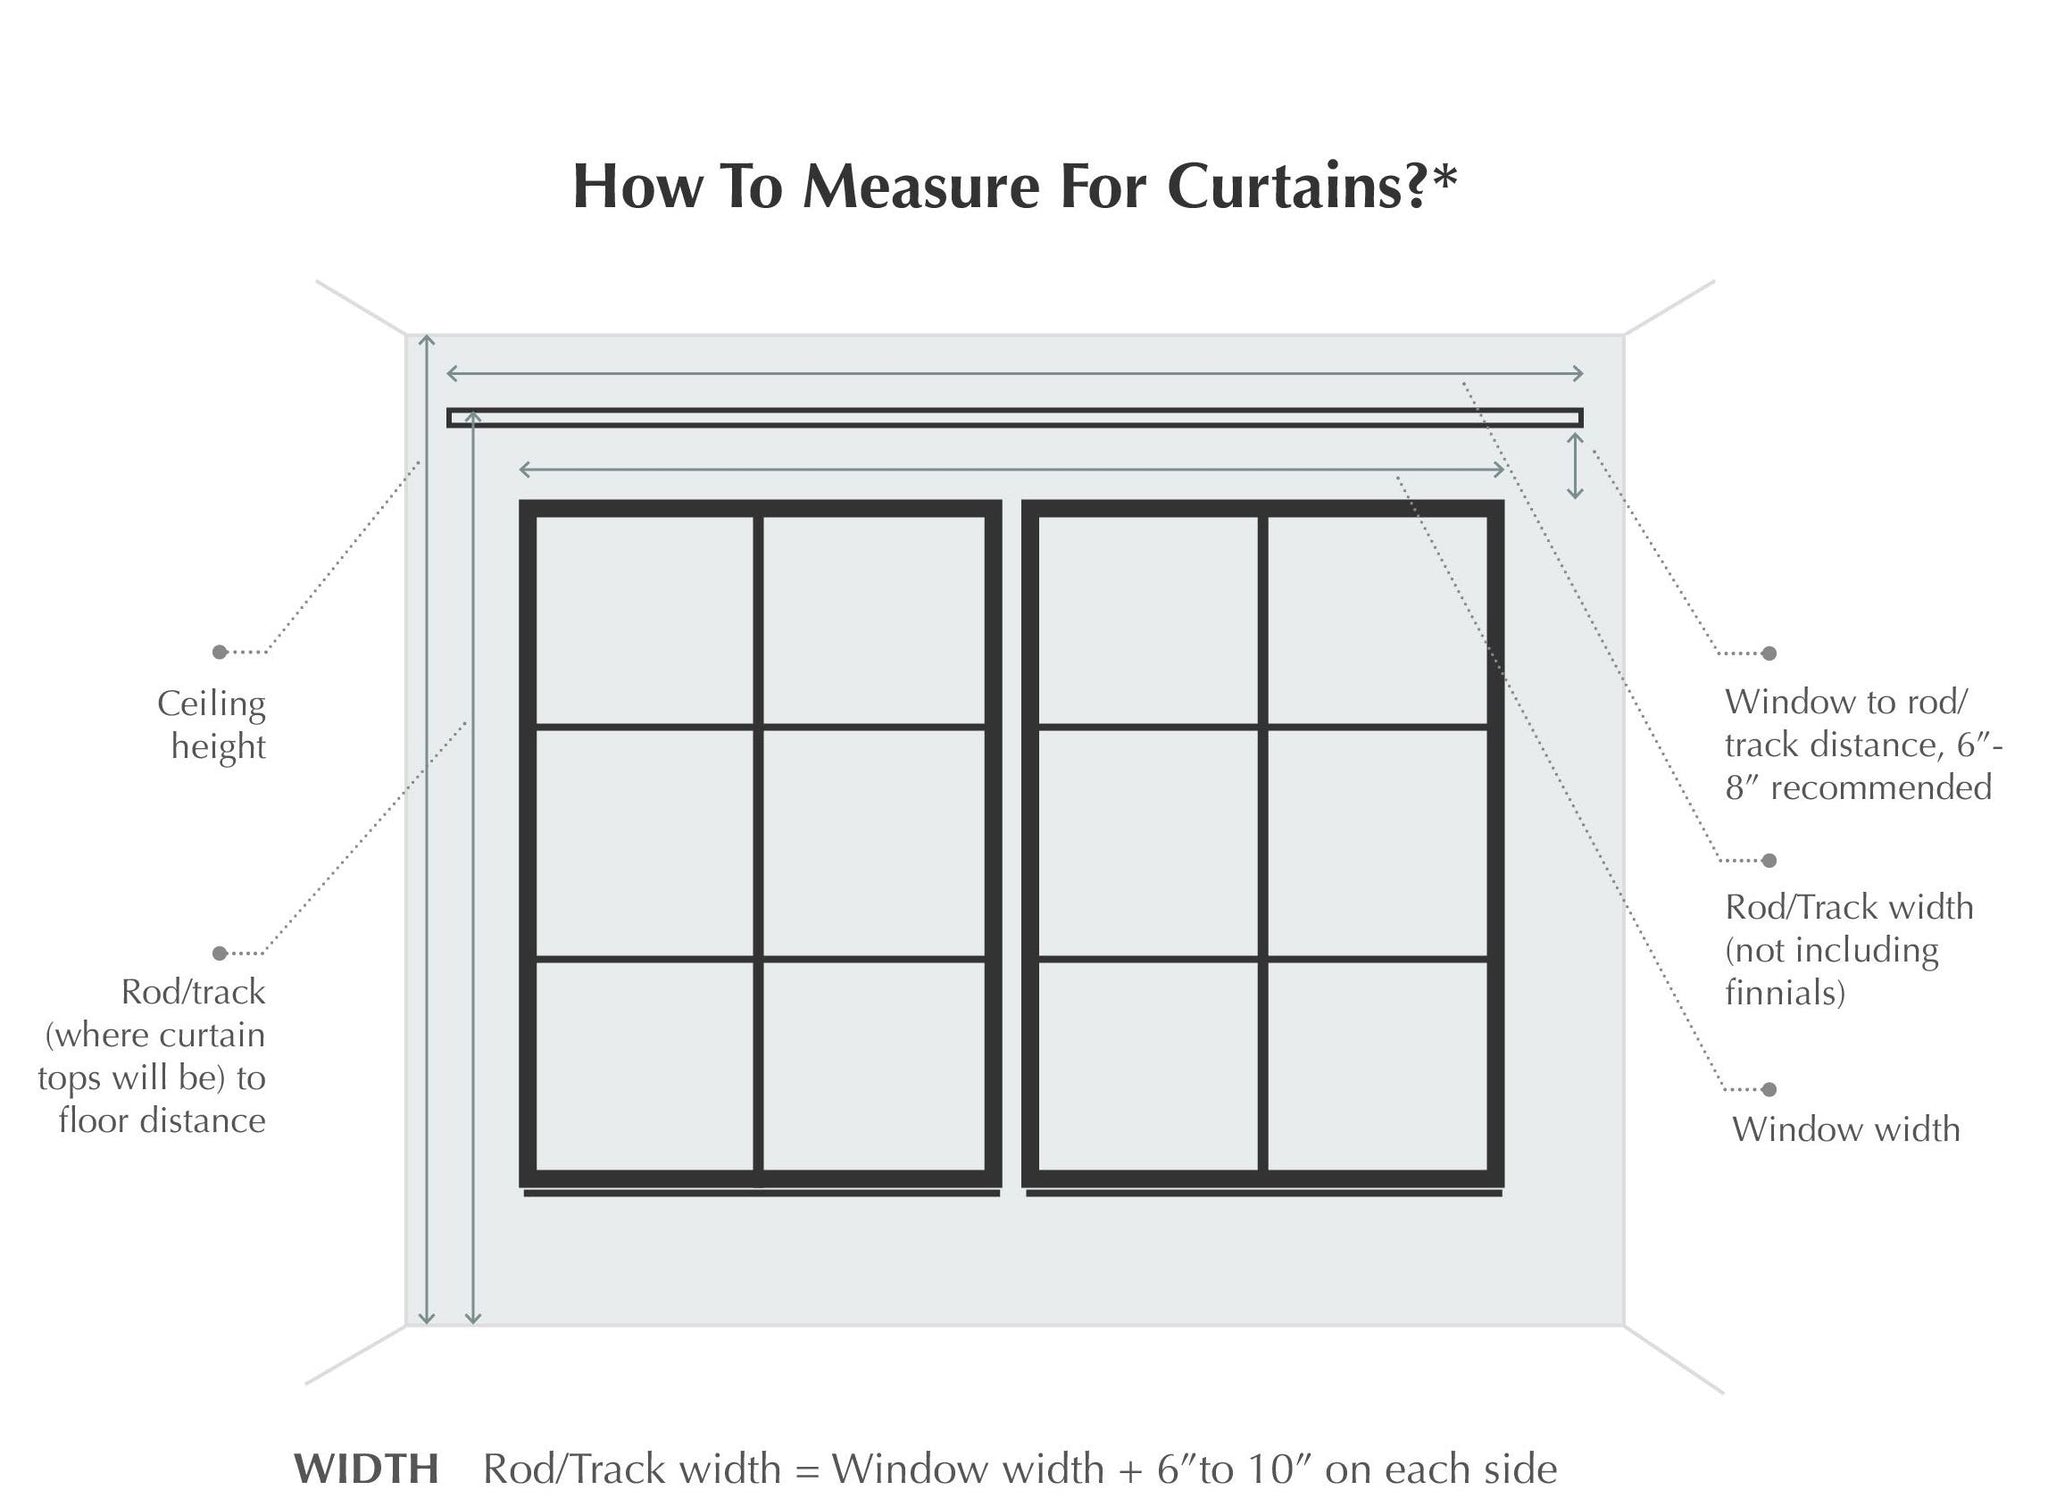 How to measure for curtains? custom made curtain size vs window sizes